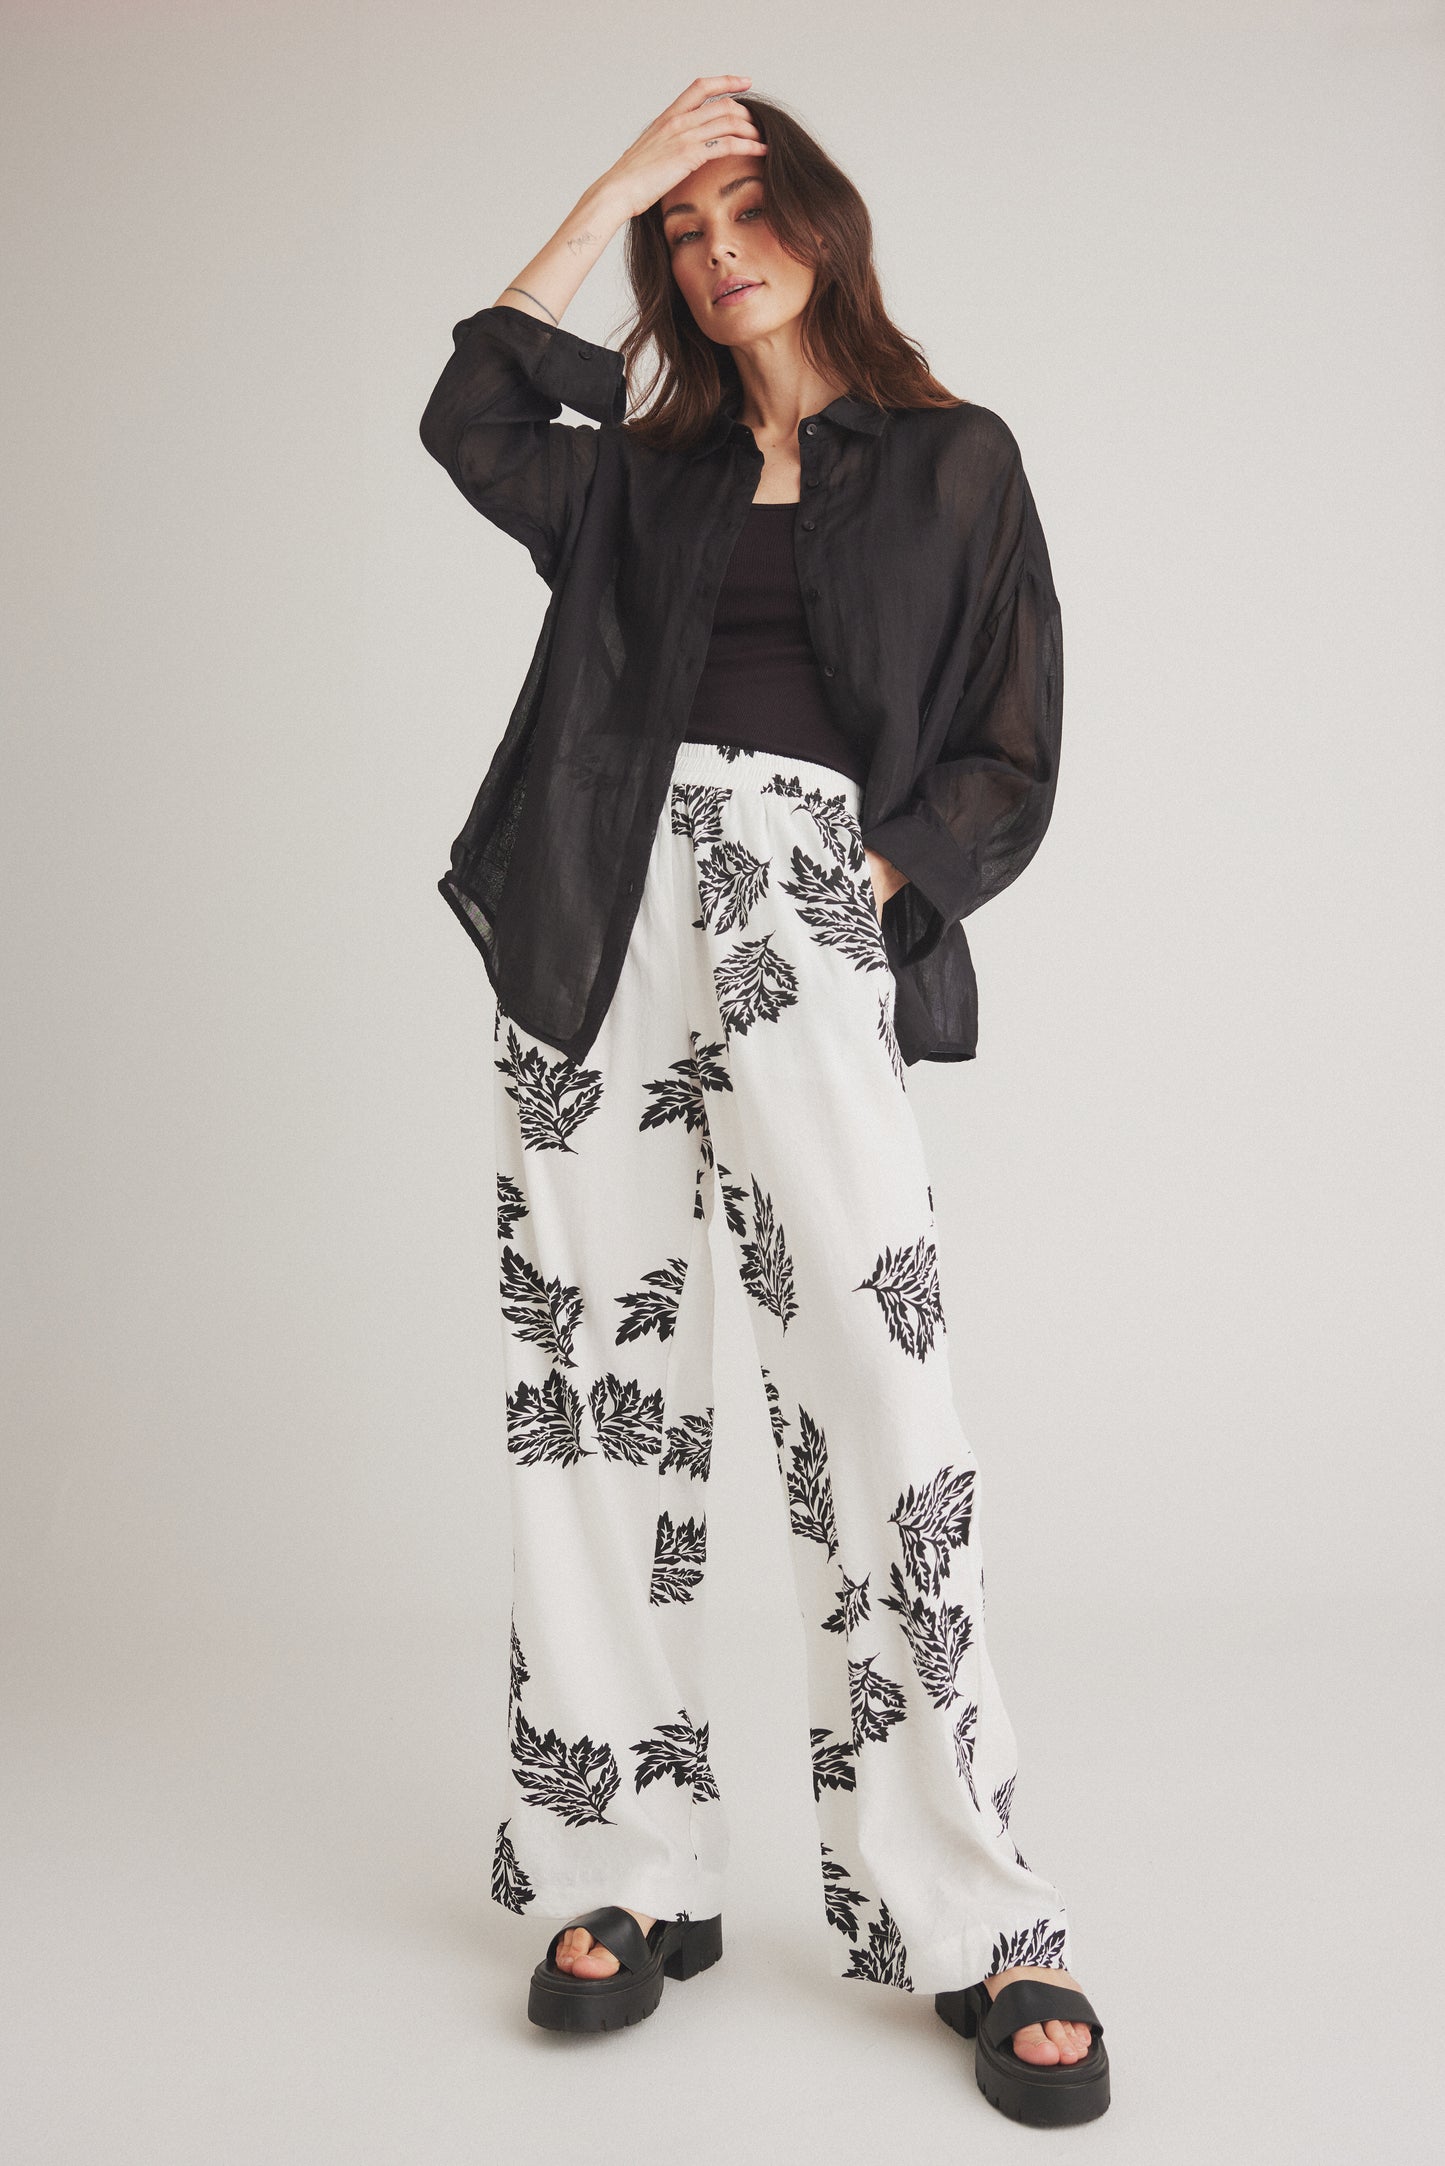 LUXZUZ // ONE TWO Eilee Pant Pant 999 Black